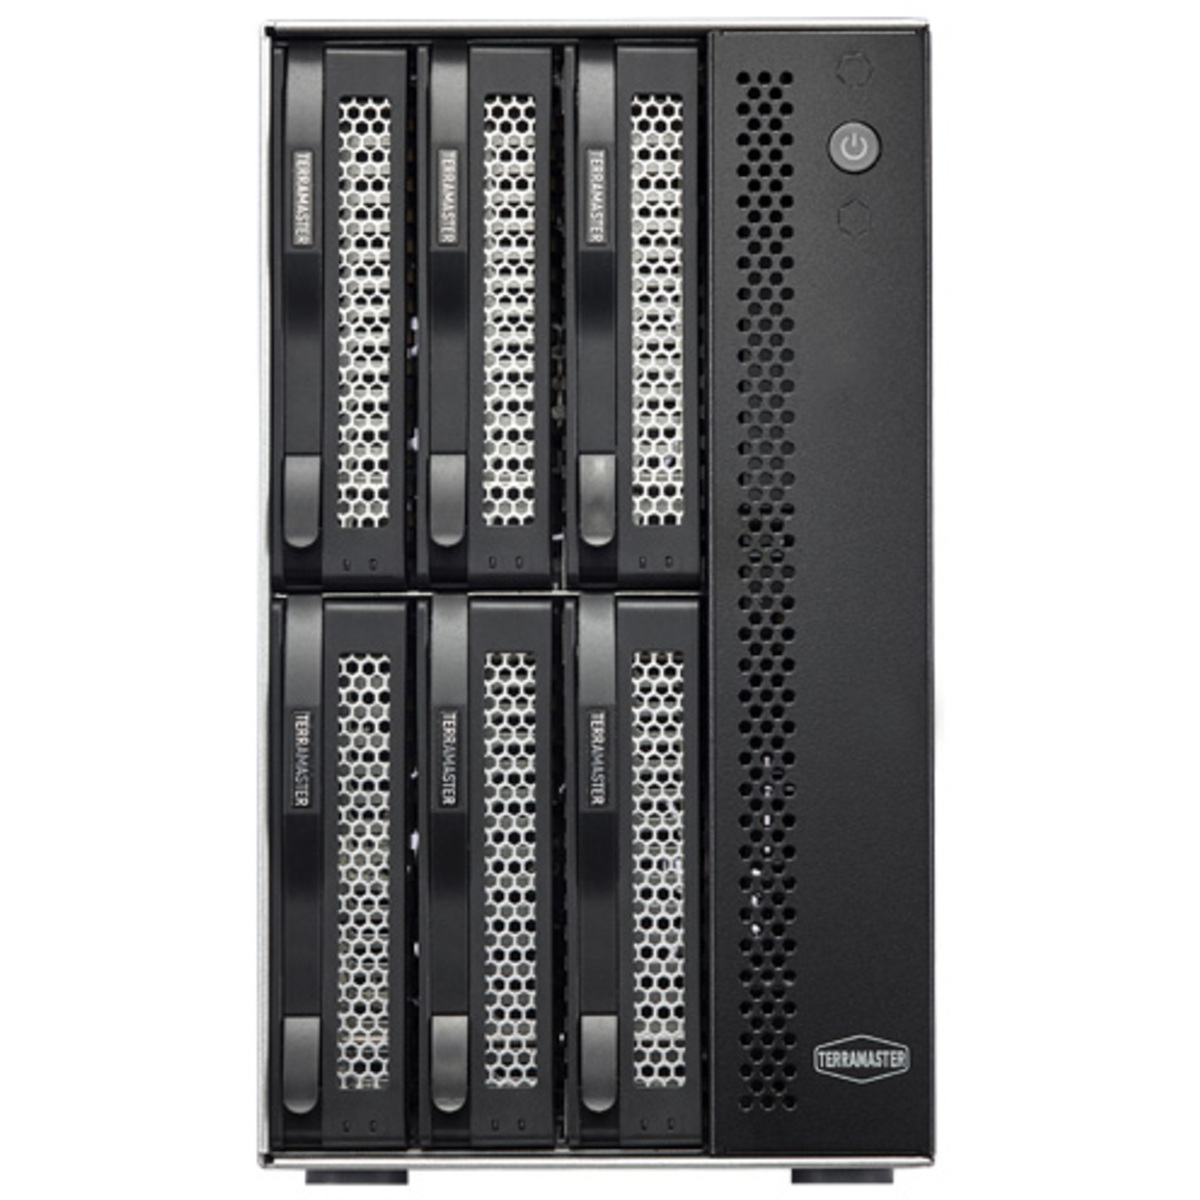 buy $3368 TerraMaster T6-423 120tb Desktop NAS - Network Attached Storage Device 6x20000gb Western Digital Red Pro WD201KFGX 3.5 7200rpm SATA 6Gb/s HDD NAS Class Drives Installed - Burn-In Tested - FREE RAM UPGRADE - nas headquarters buy network attached storage server device das new raid-5 free shipping usa T6-423